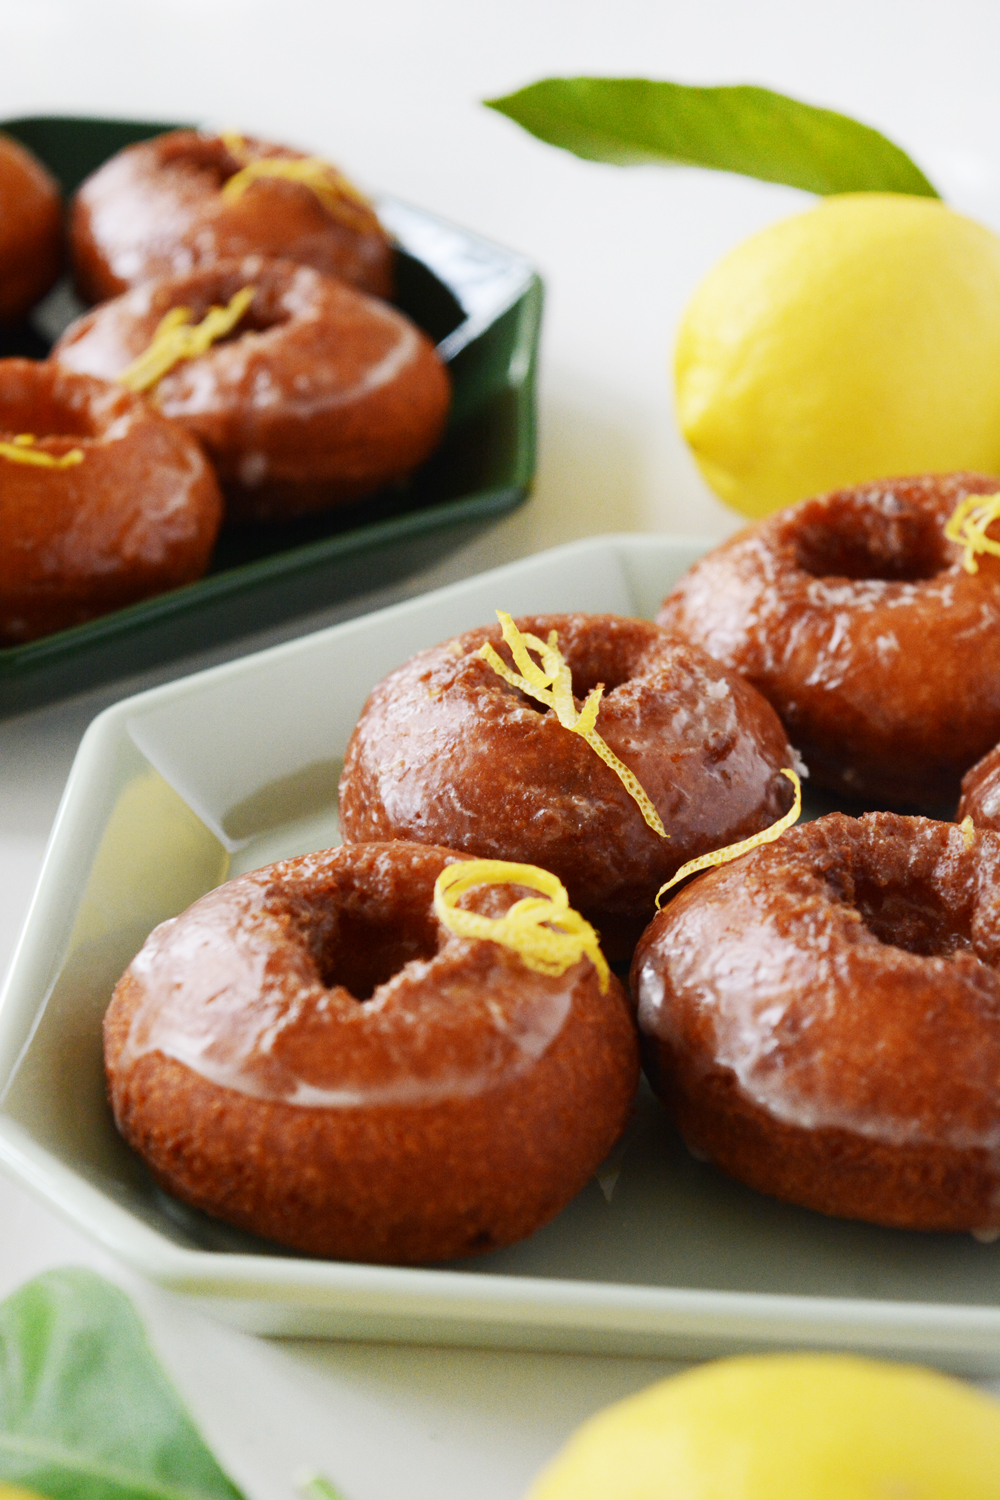 Lemon Old Fashioned Homemade Donuts